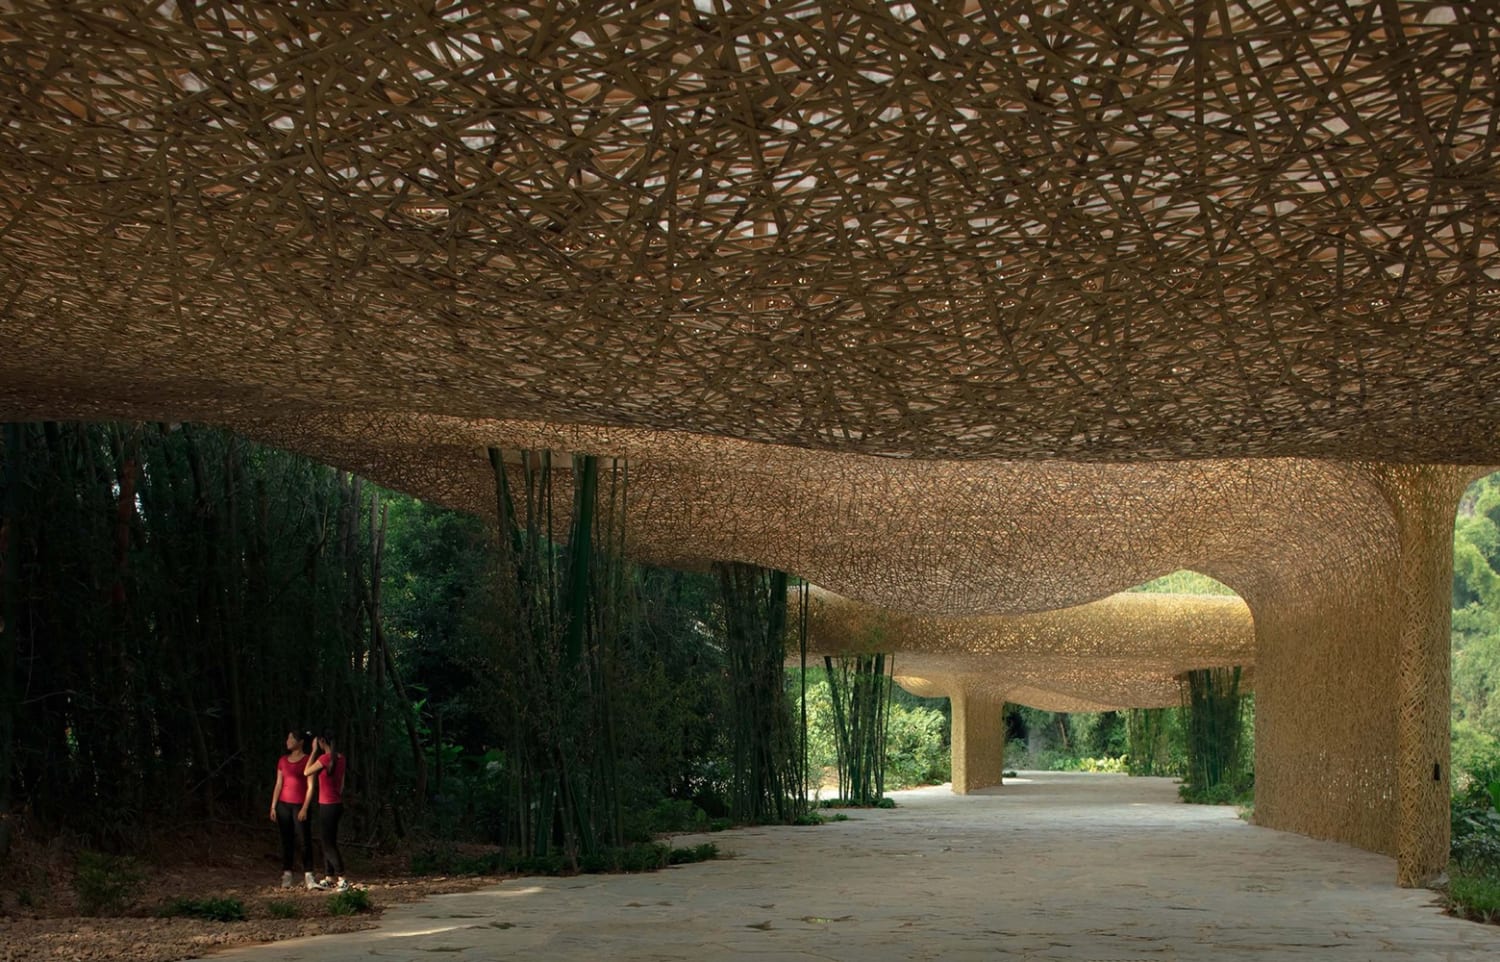 Light Streams through a Swelling Canopy of Woven Bamboo in China's Karst Mountains — Colossal